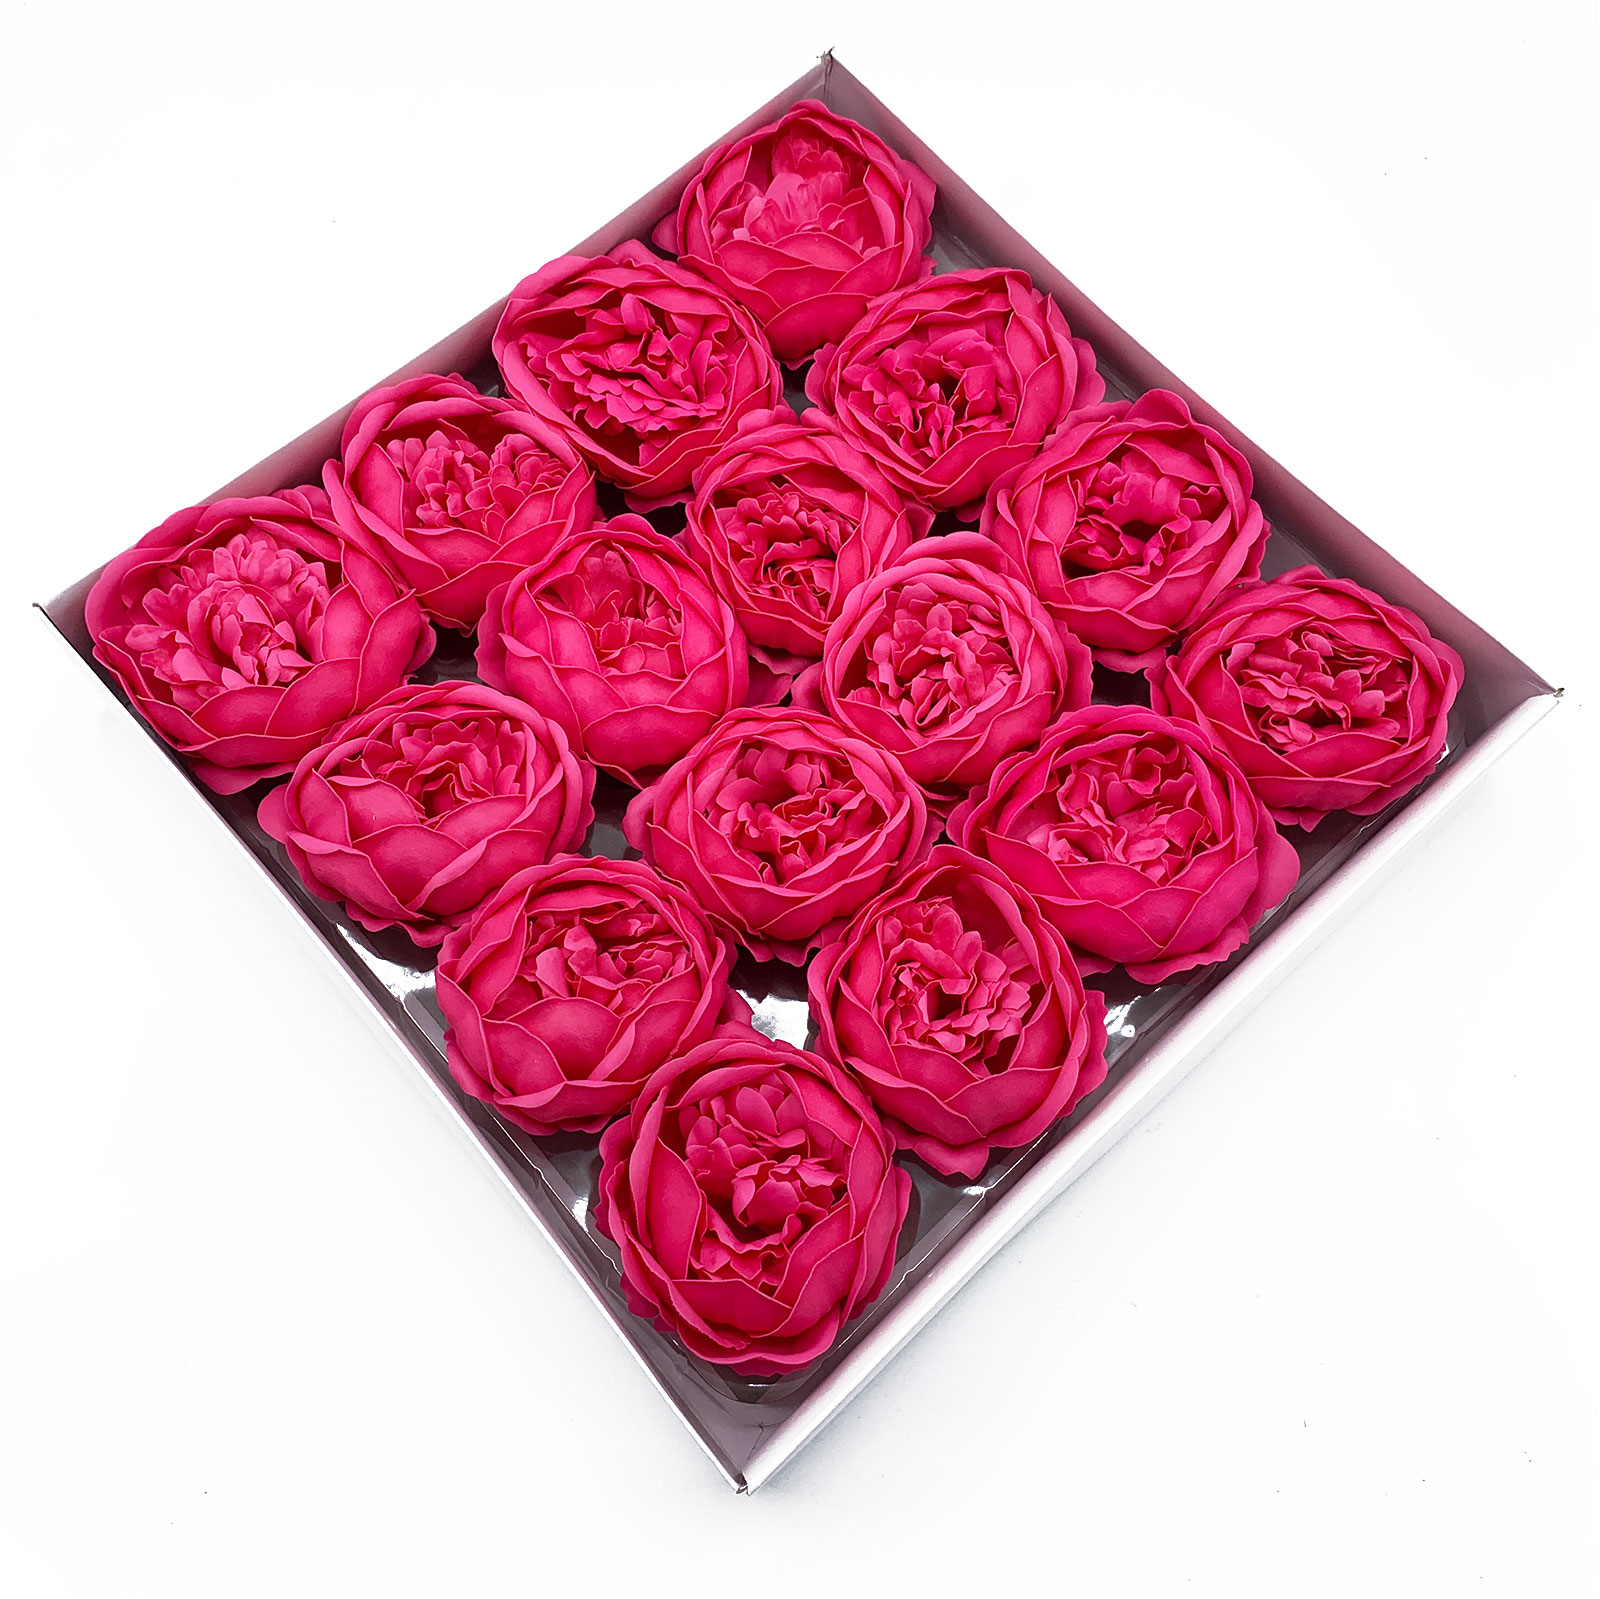 10 x Craft Soap Flowers - Ext Large Peony - Rose